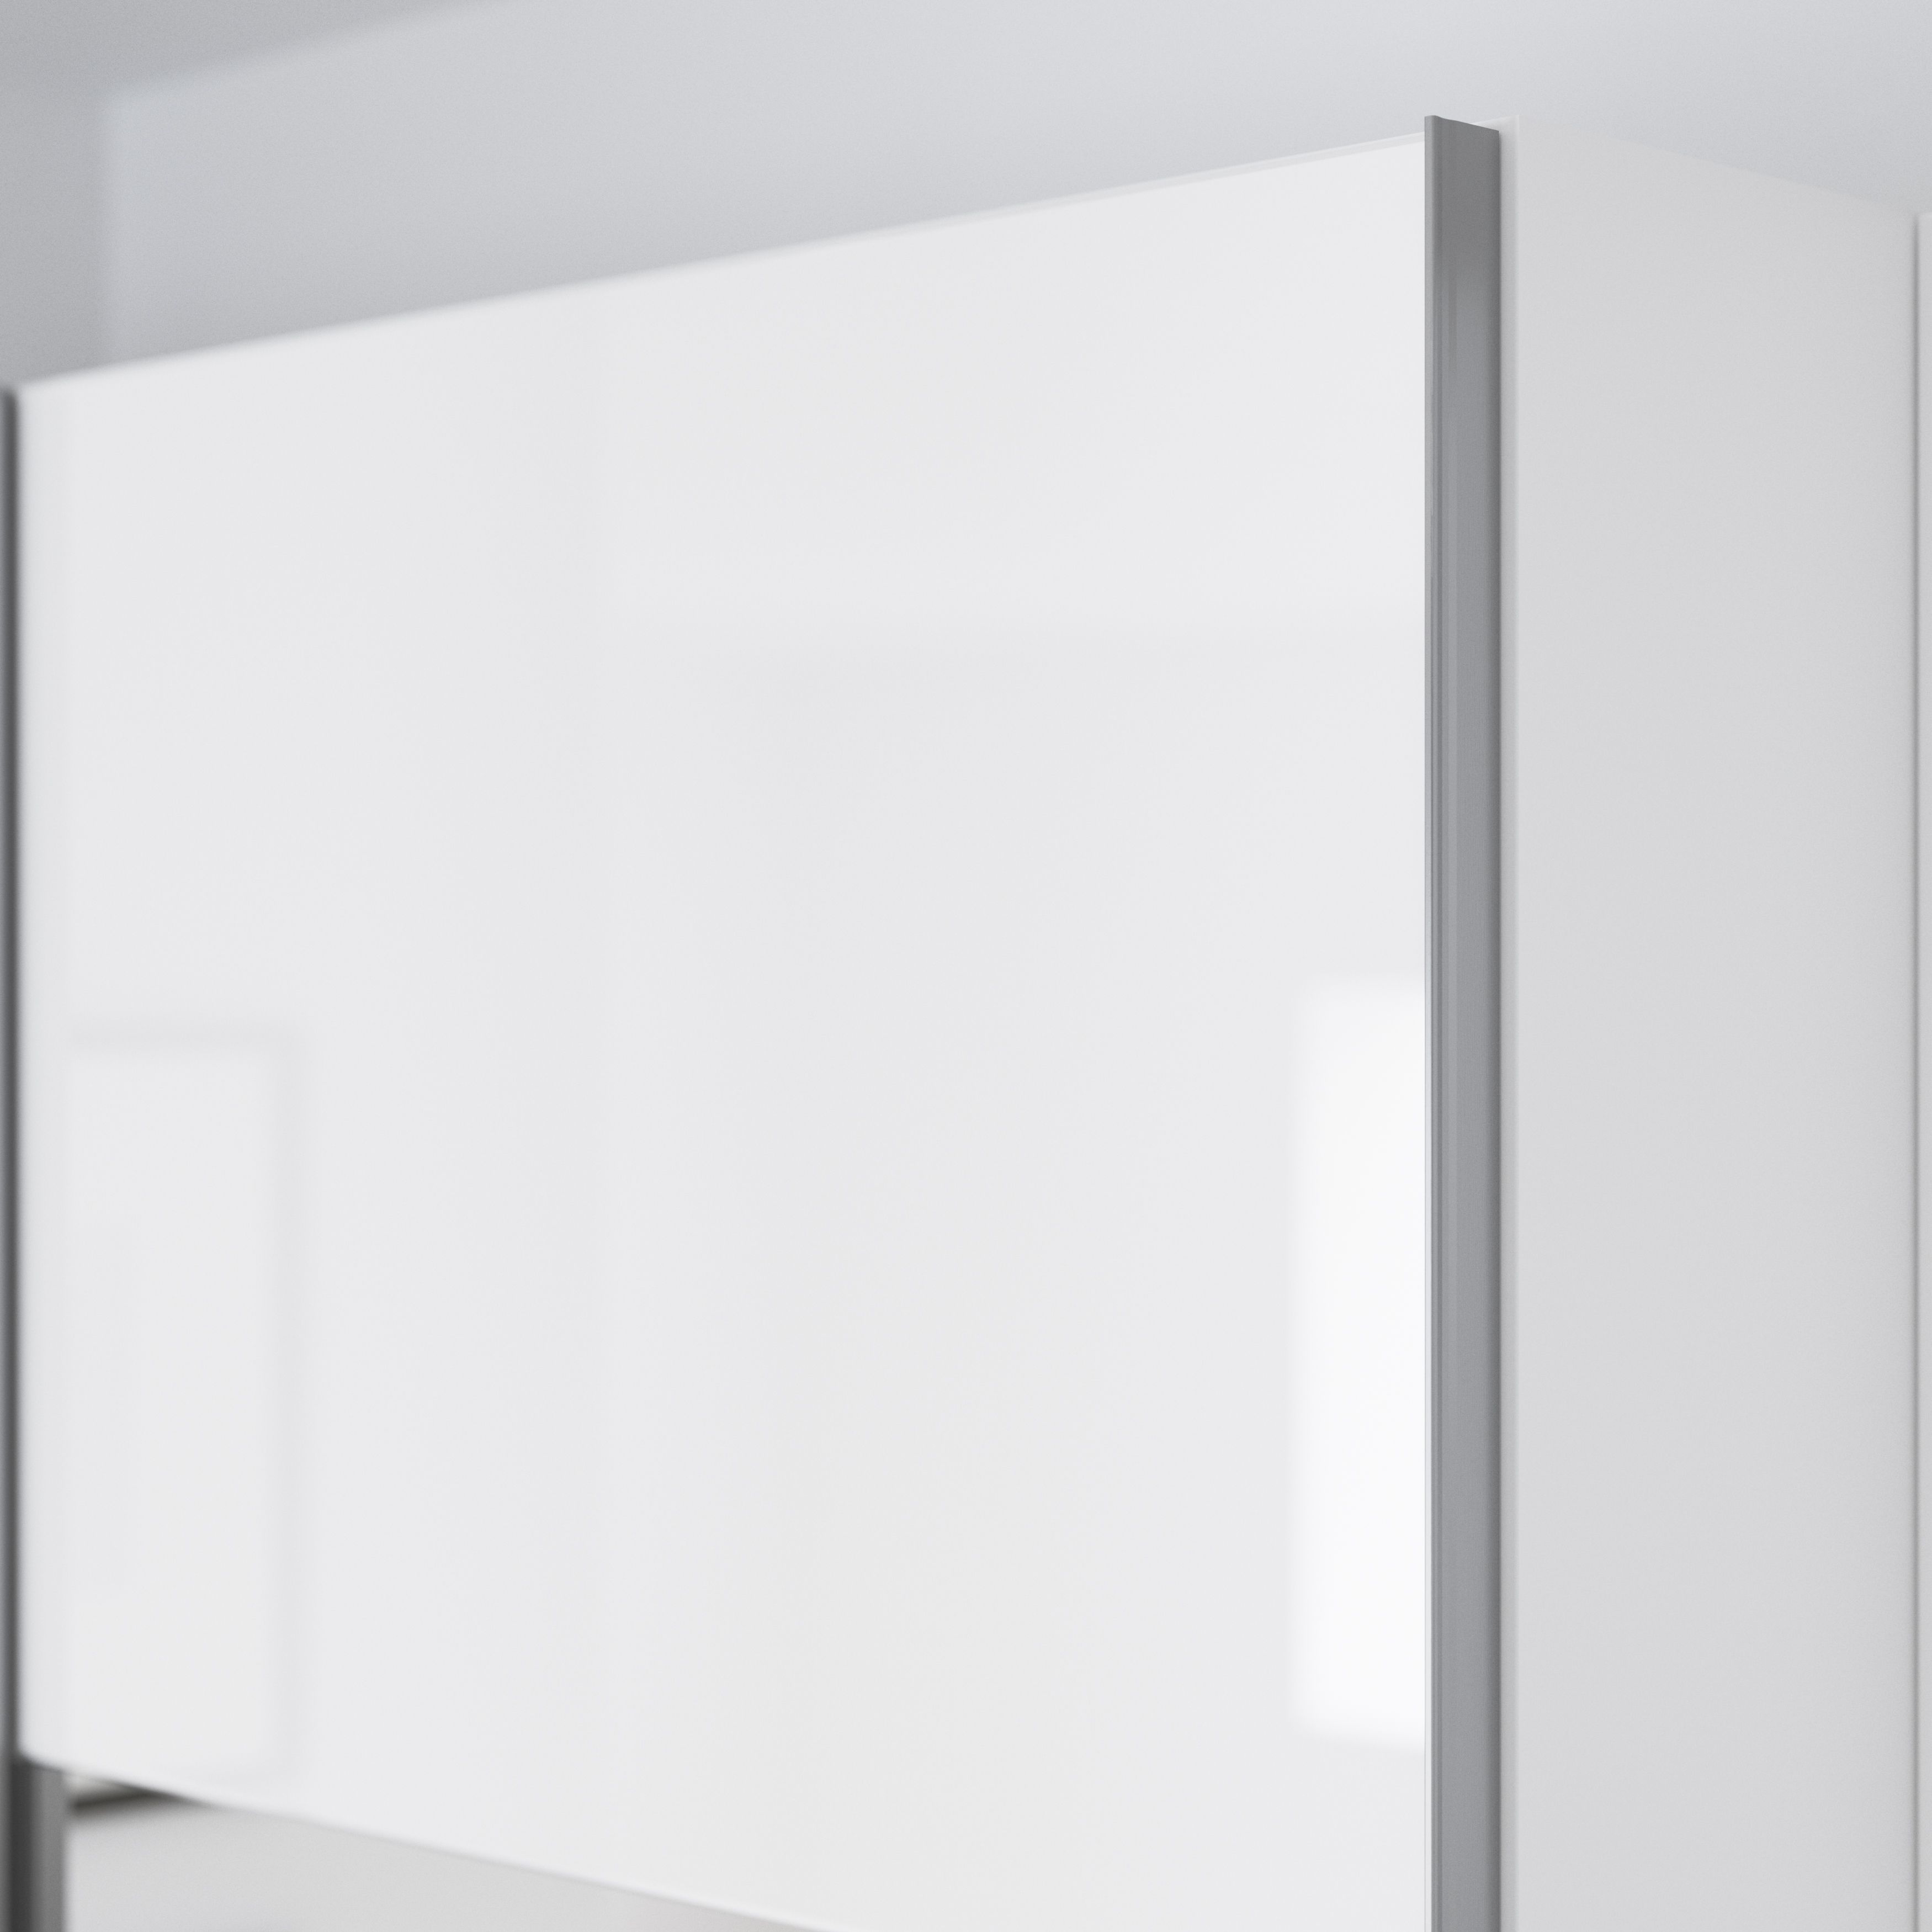 GoodHome Atomia Gloss White Sliding wardrobe door (H) 560mm x (W) 737mm, Pack of 4